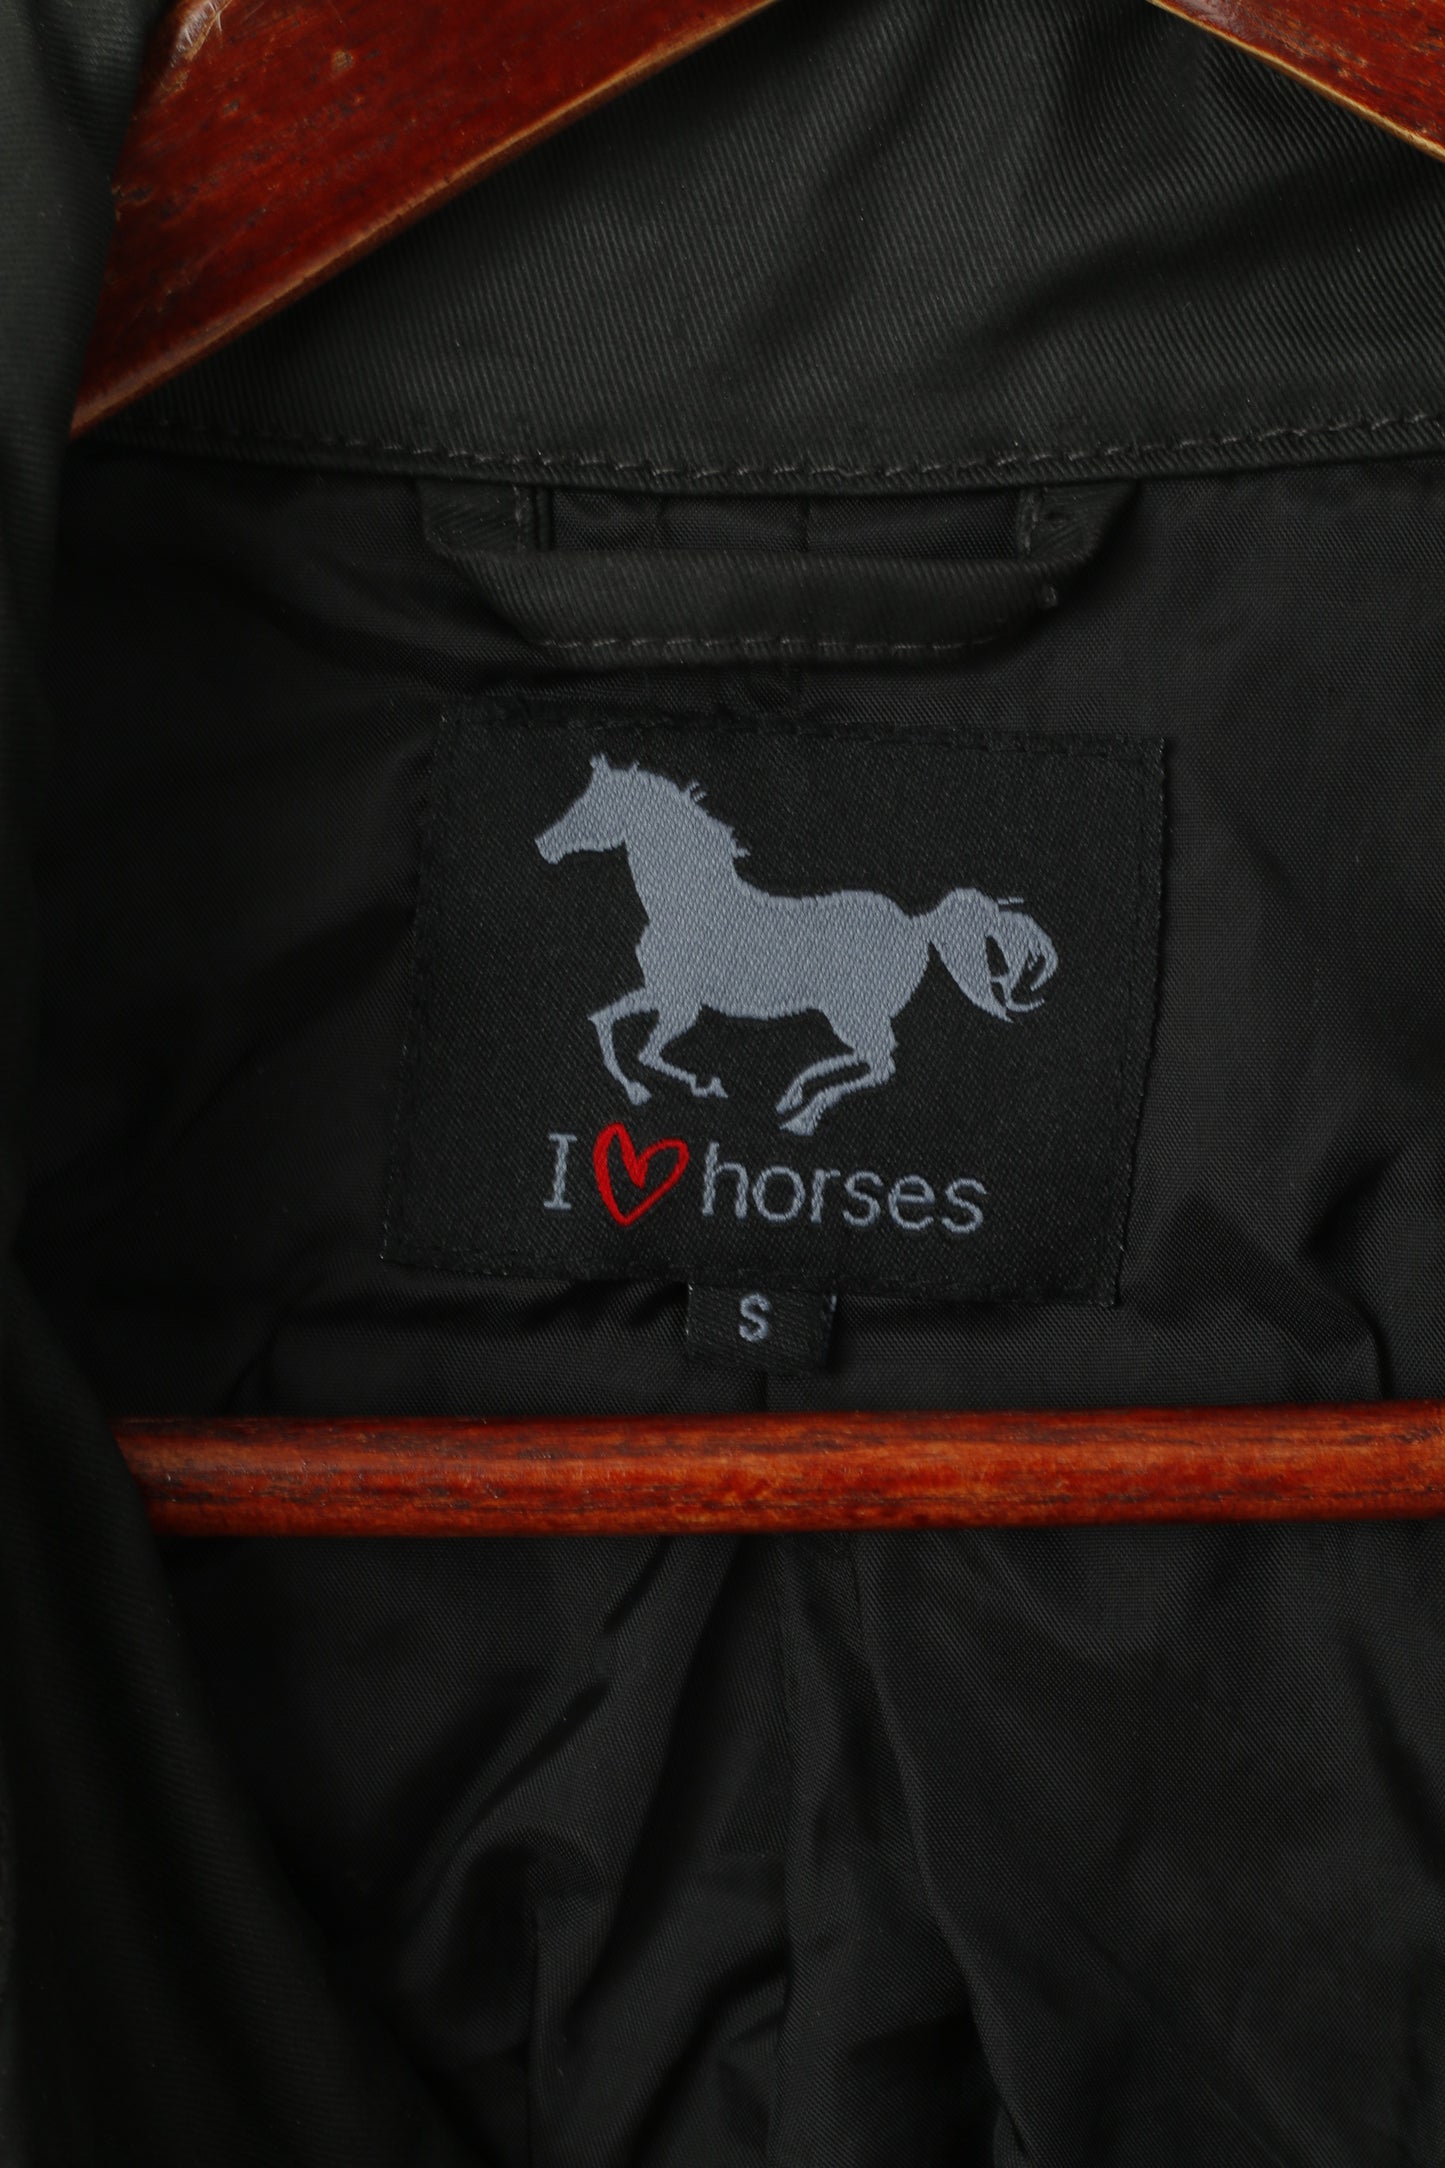 I love Horses Women S Jacket Black Wax Cotton Single Breasted Belted Fit Top